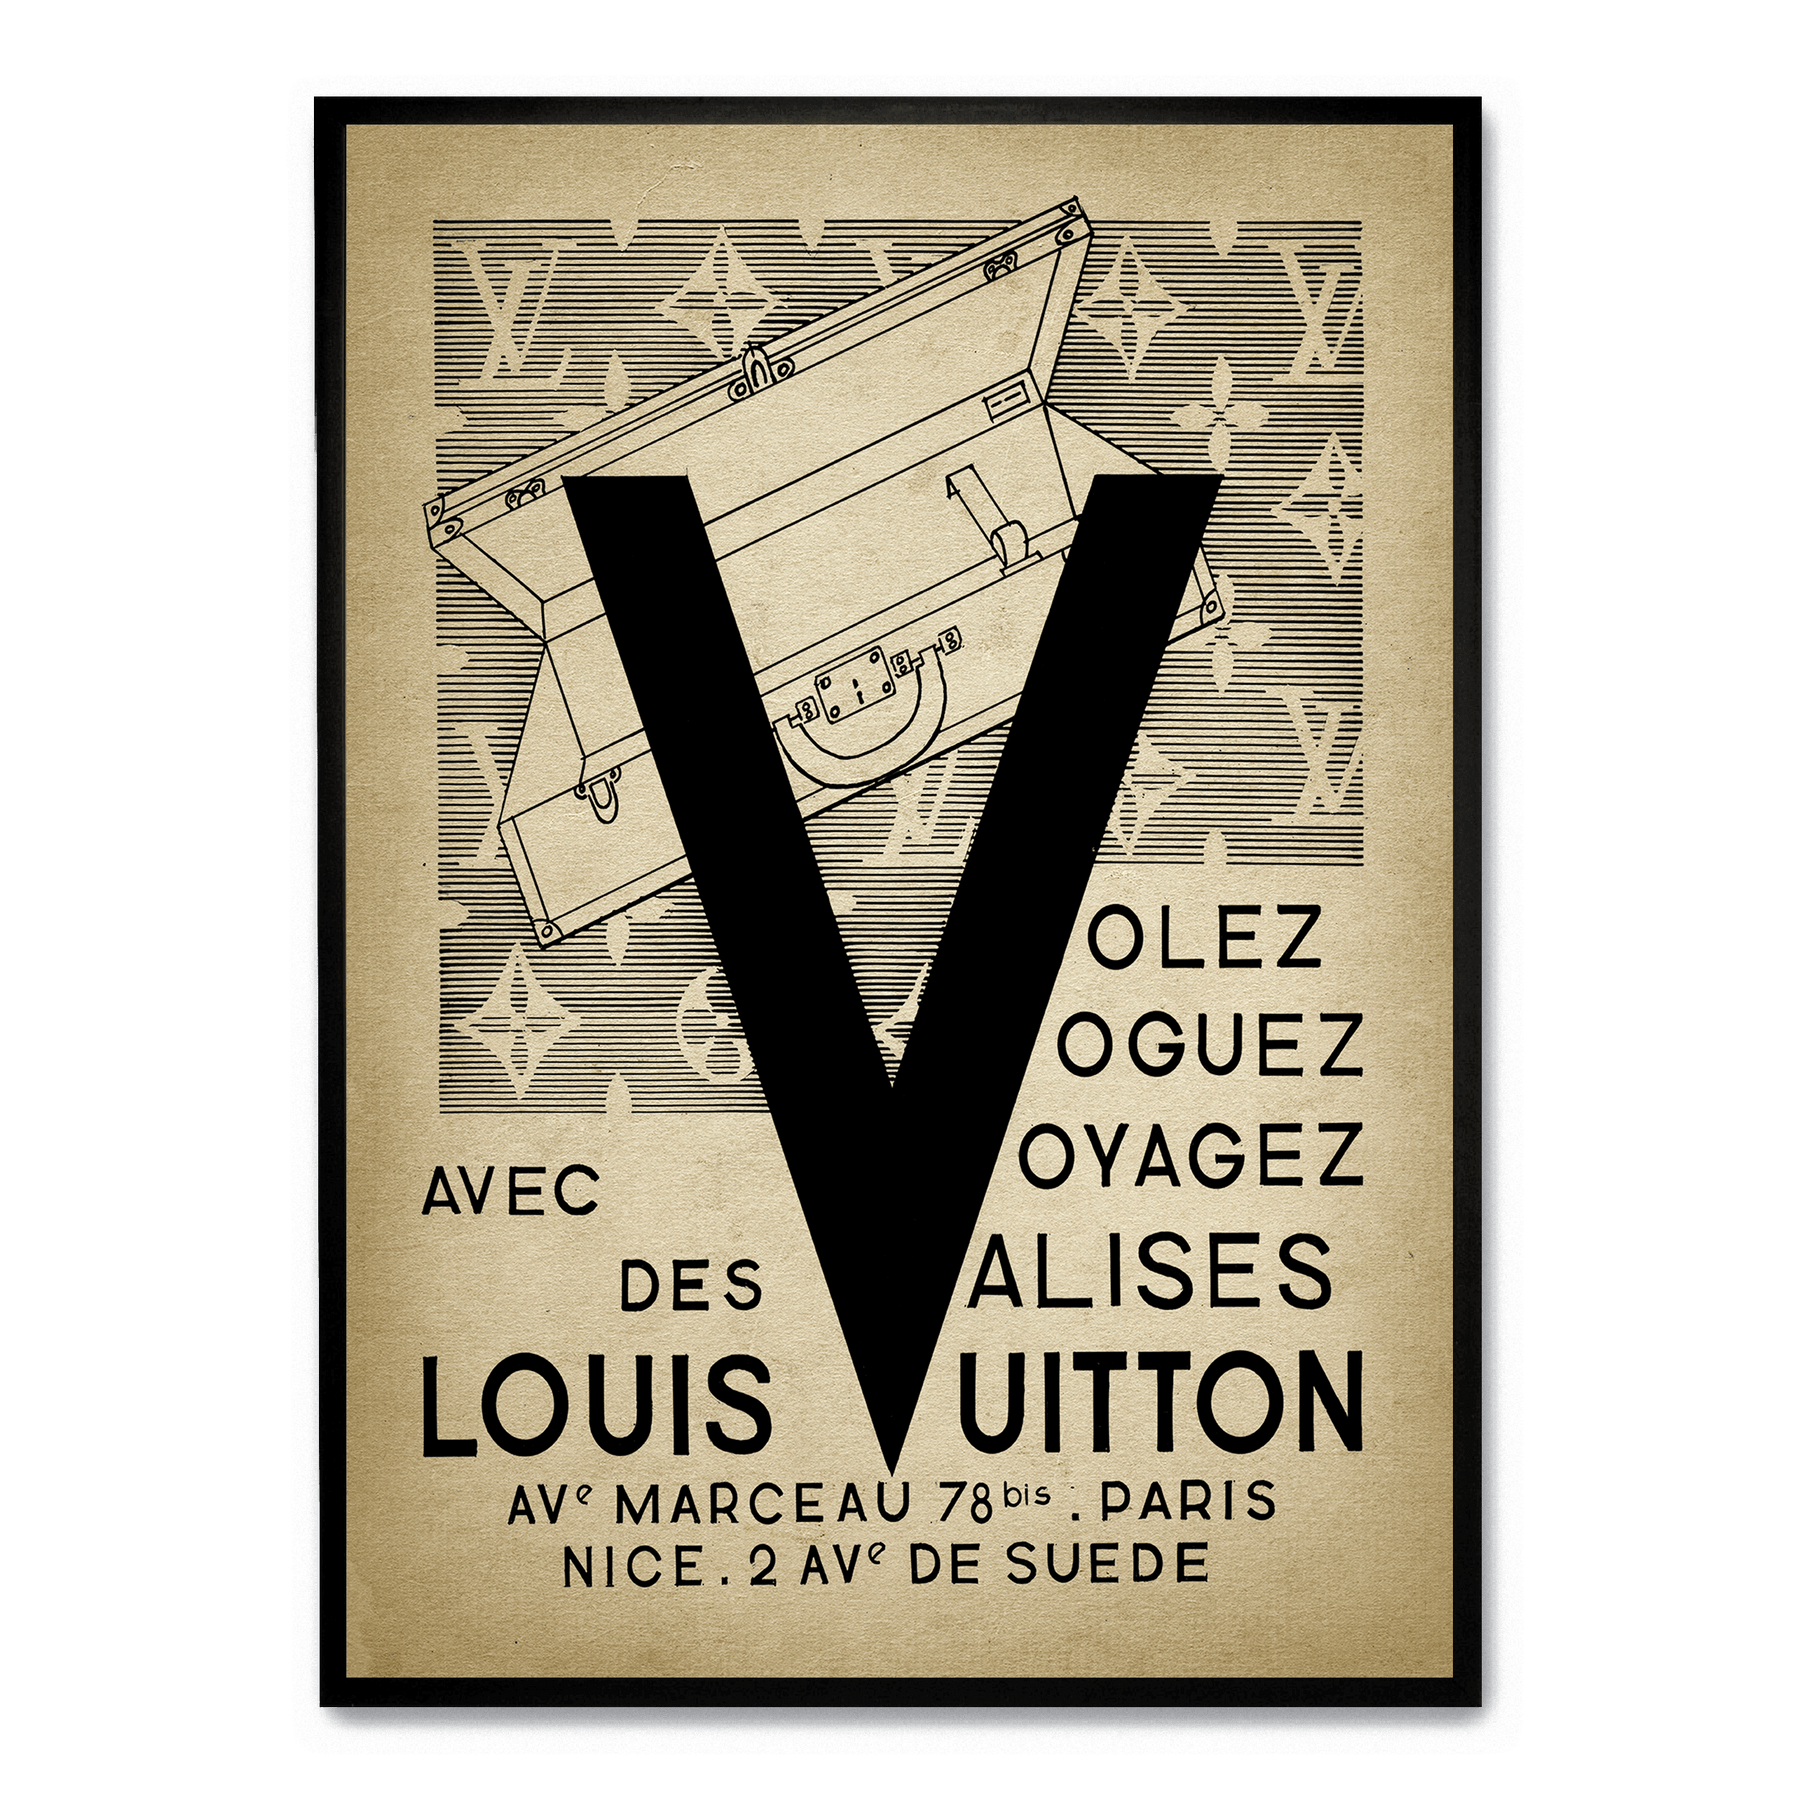 Buy Vintage Louis Vuitton Poster Online In India -  India